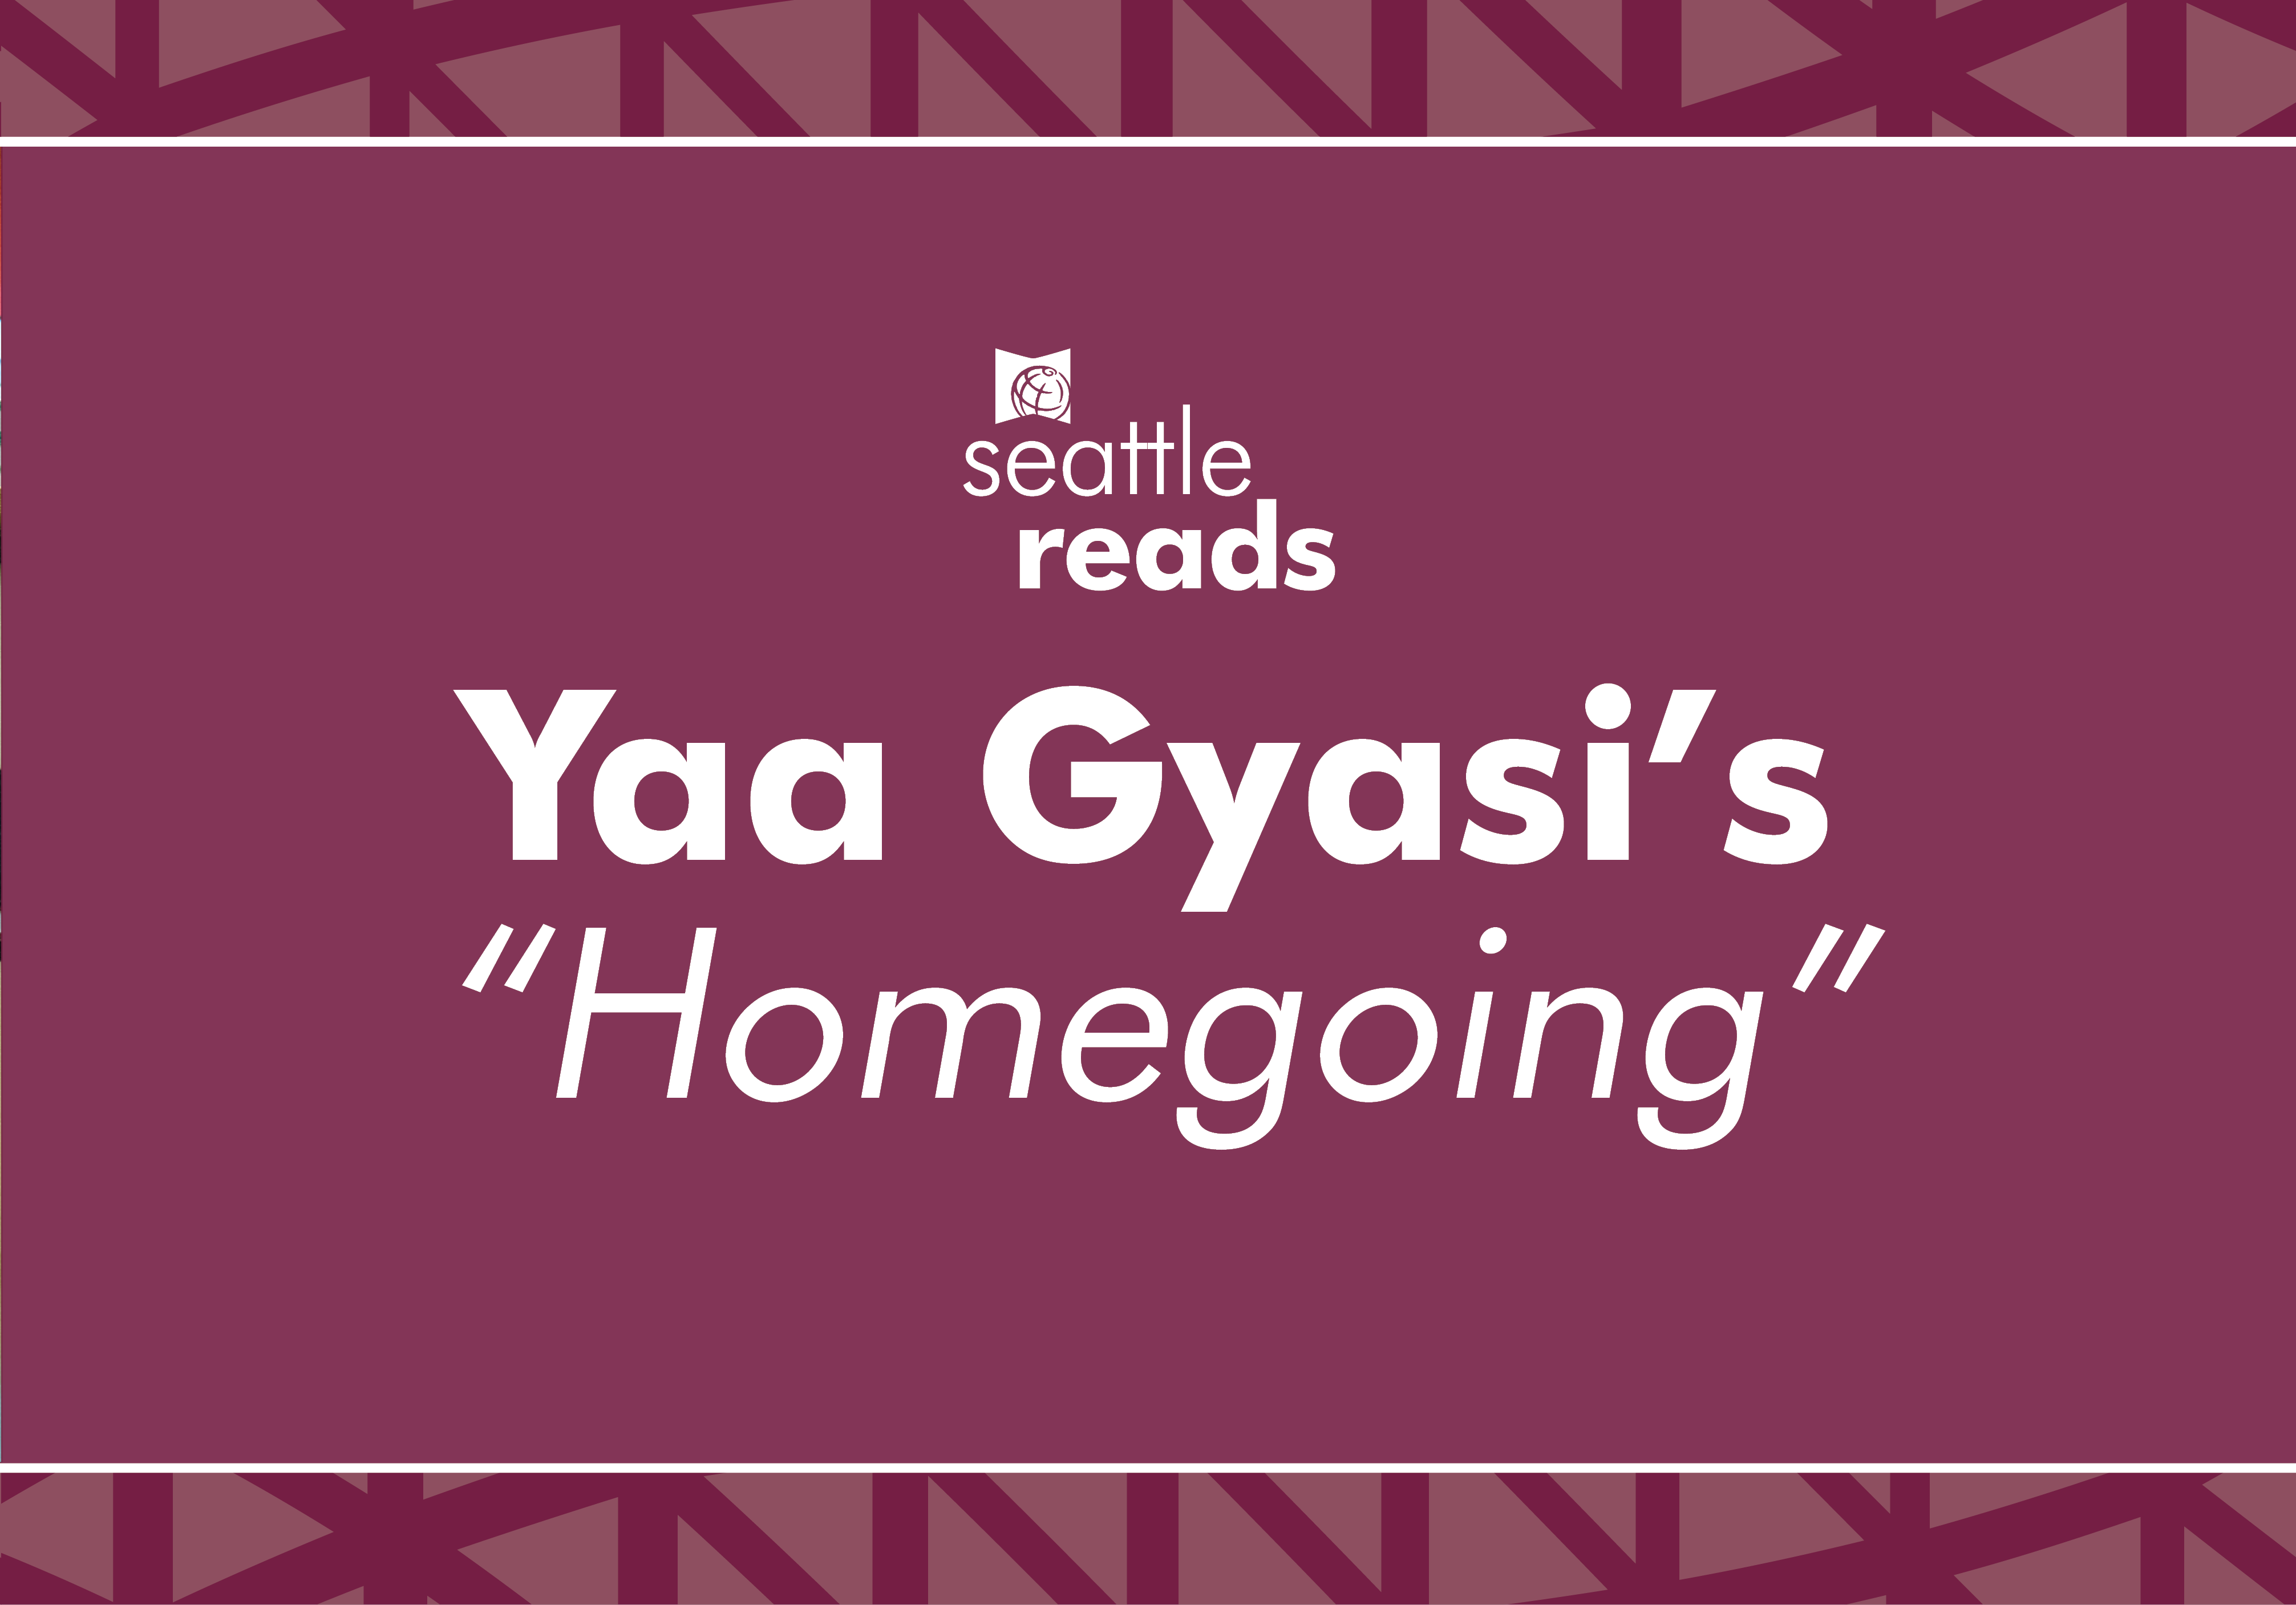 Yaa Gyasi's "Homegoing" for Seattle Reads 2018